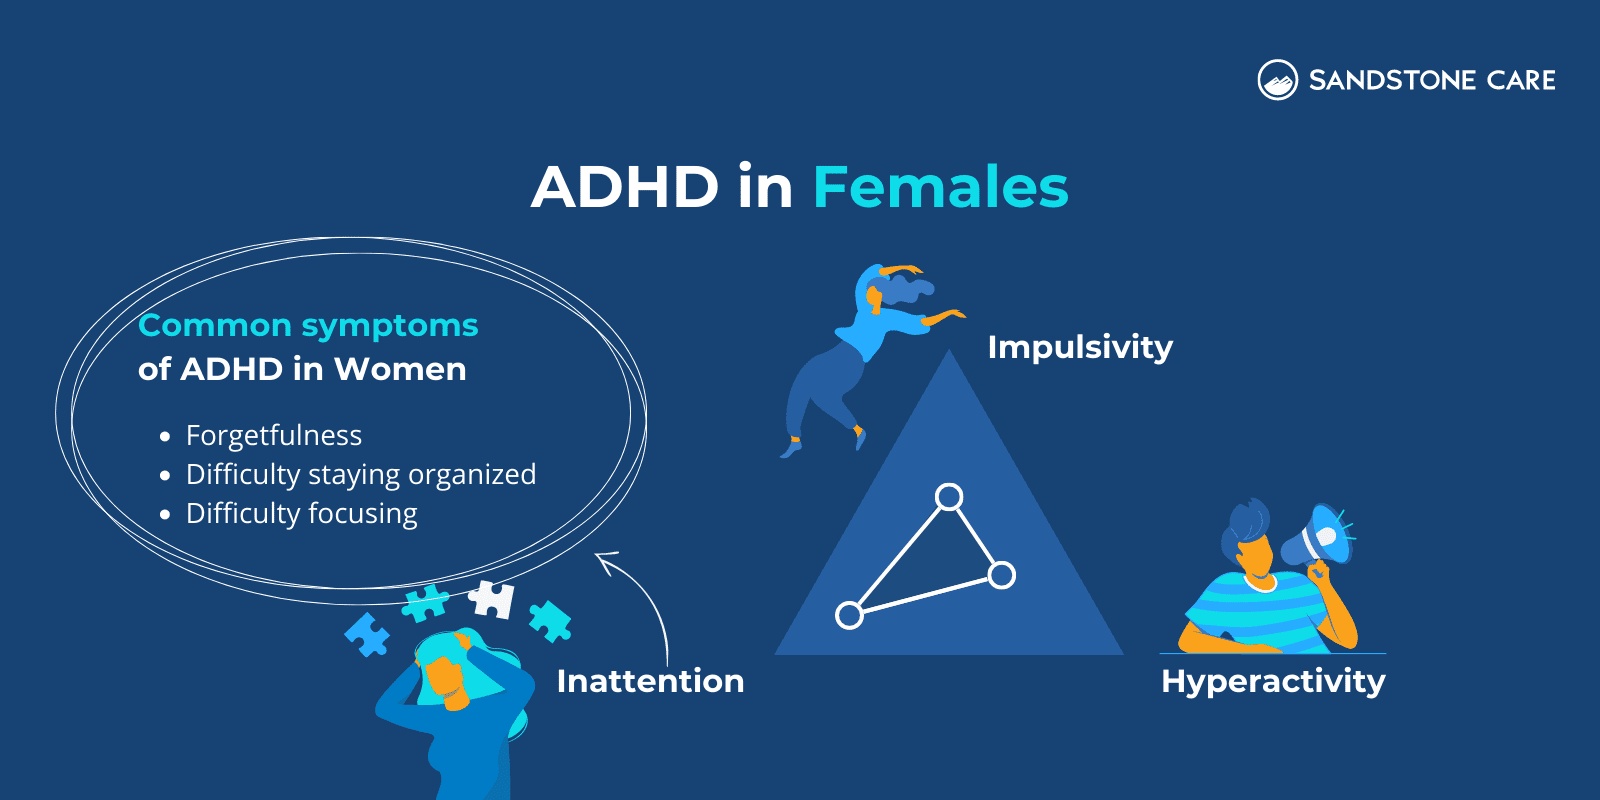 ADHD in Females is illustrated by highlighting the most common type of ADHD in females (Inattention) as well as common symptoms